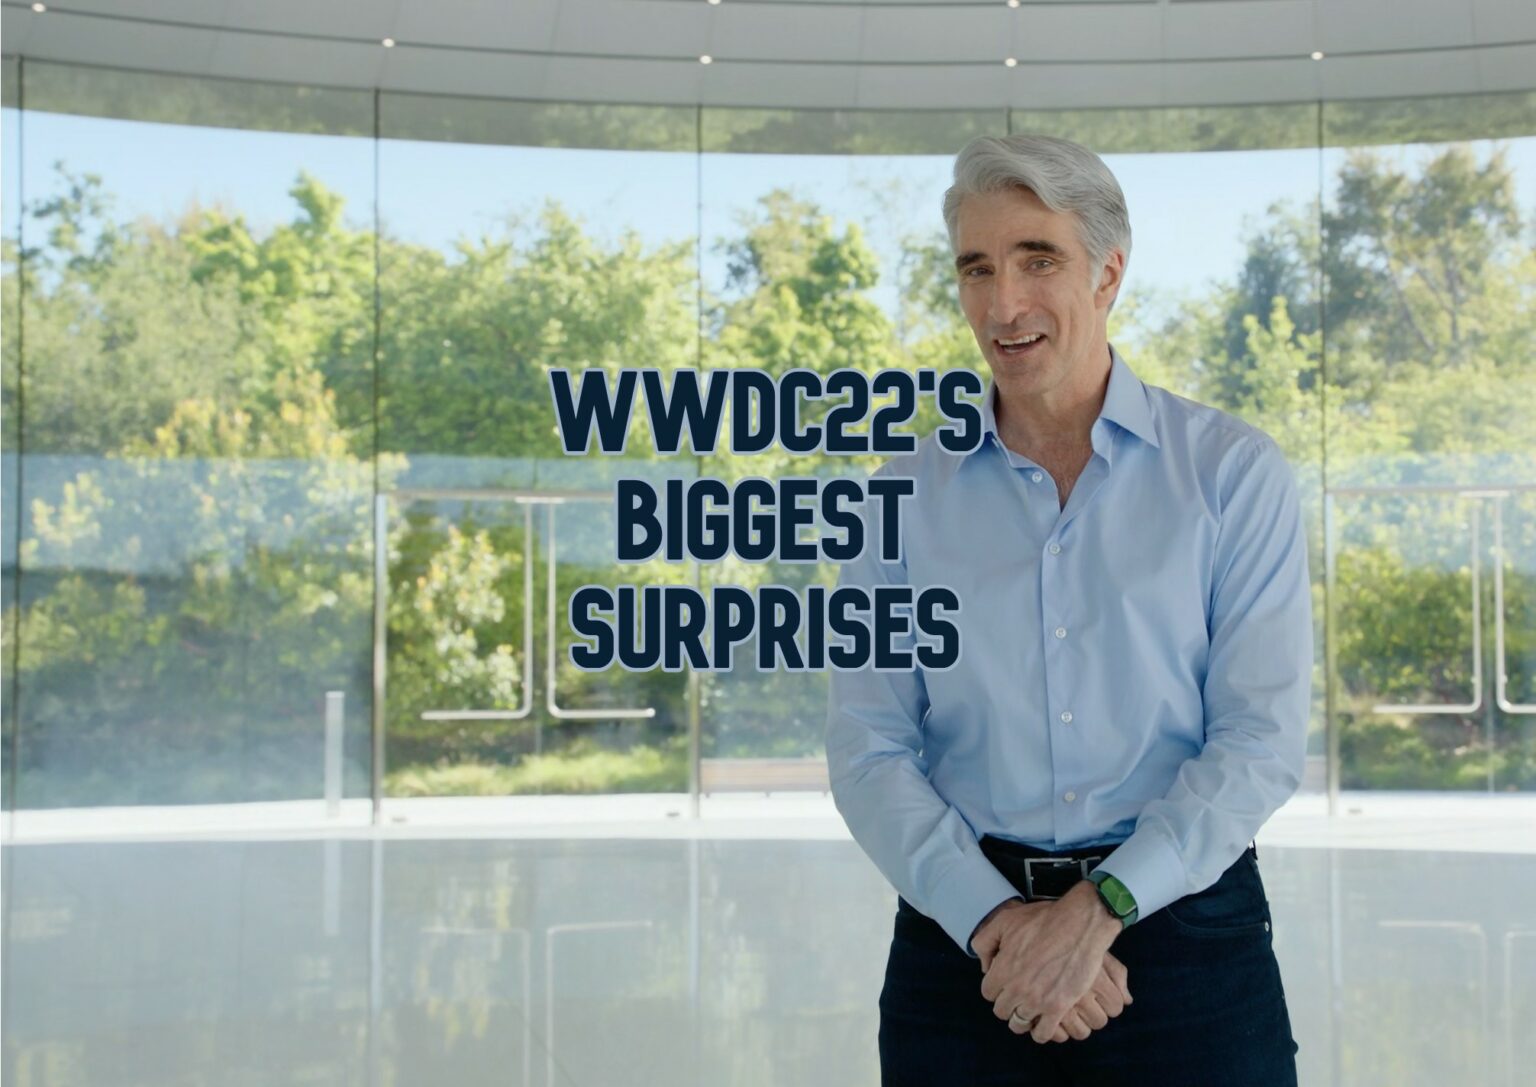 Apple's team of software wizards unleashed a torrent of welcome surprises in the WWDC22 keynote.